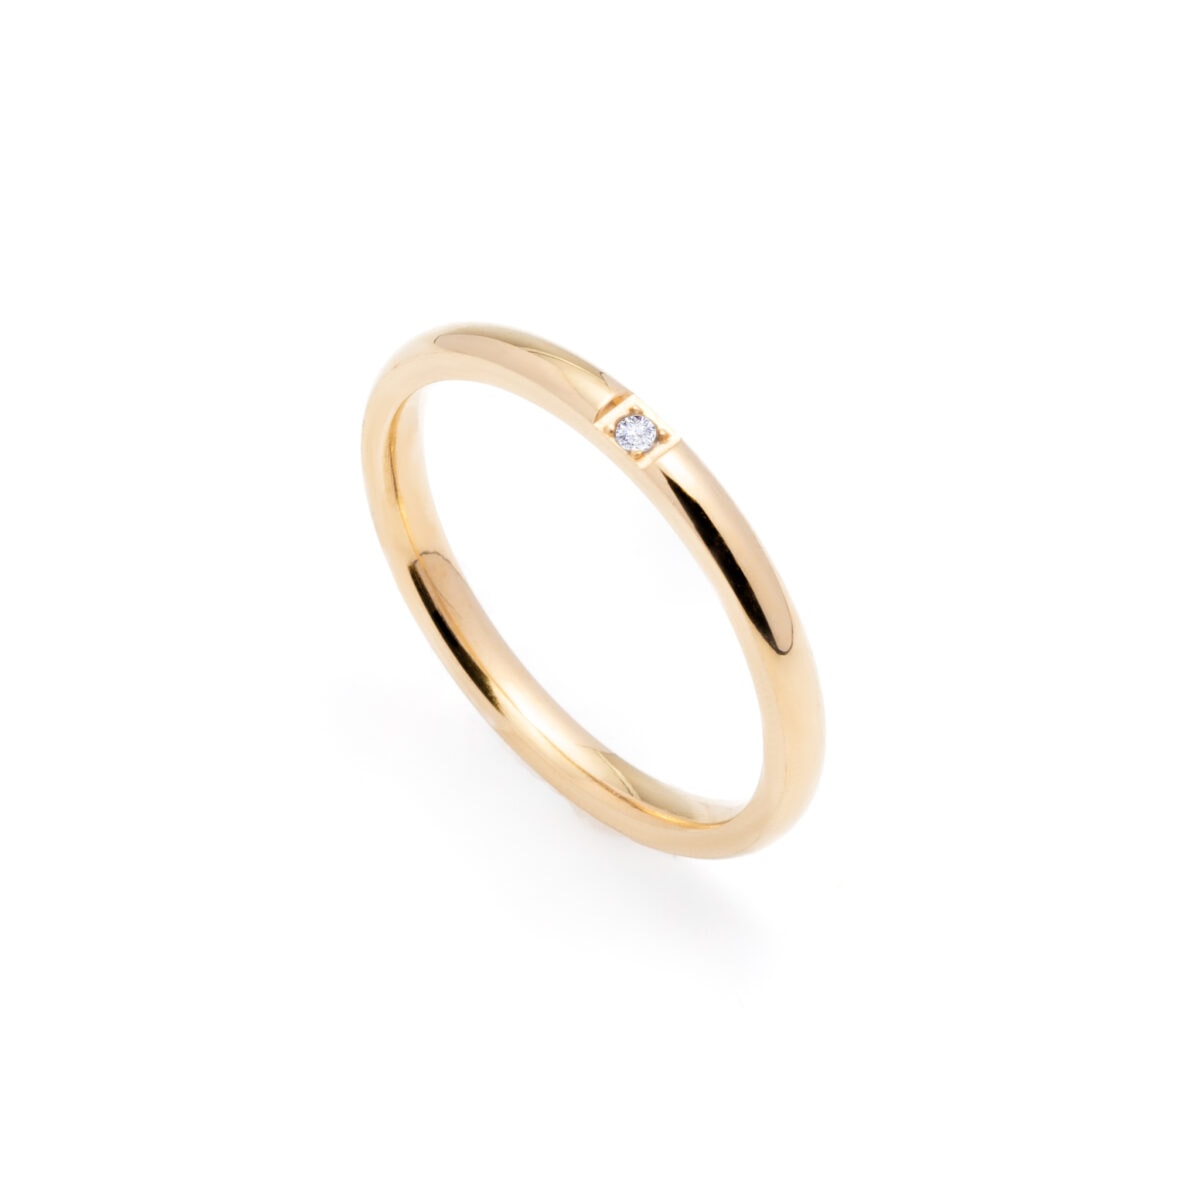 https://m.clubbella.co/product/spark-solitaire-minimal-ring/ Spark solitaire Minimal RIng (1)